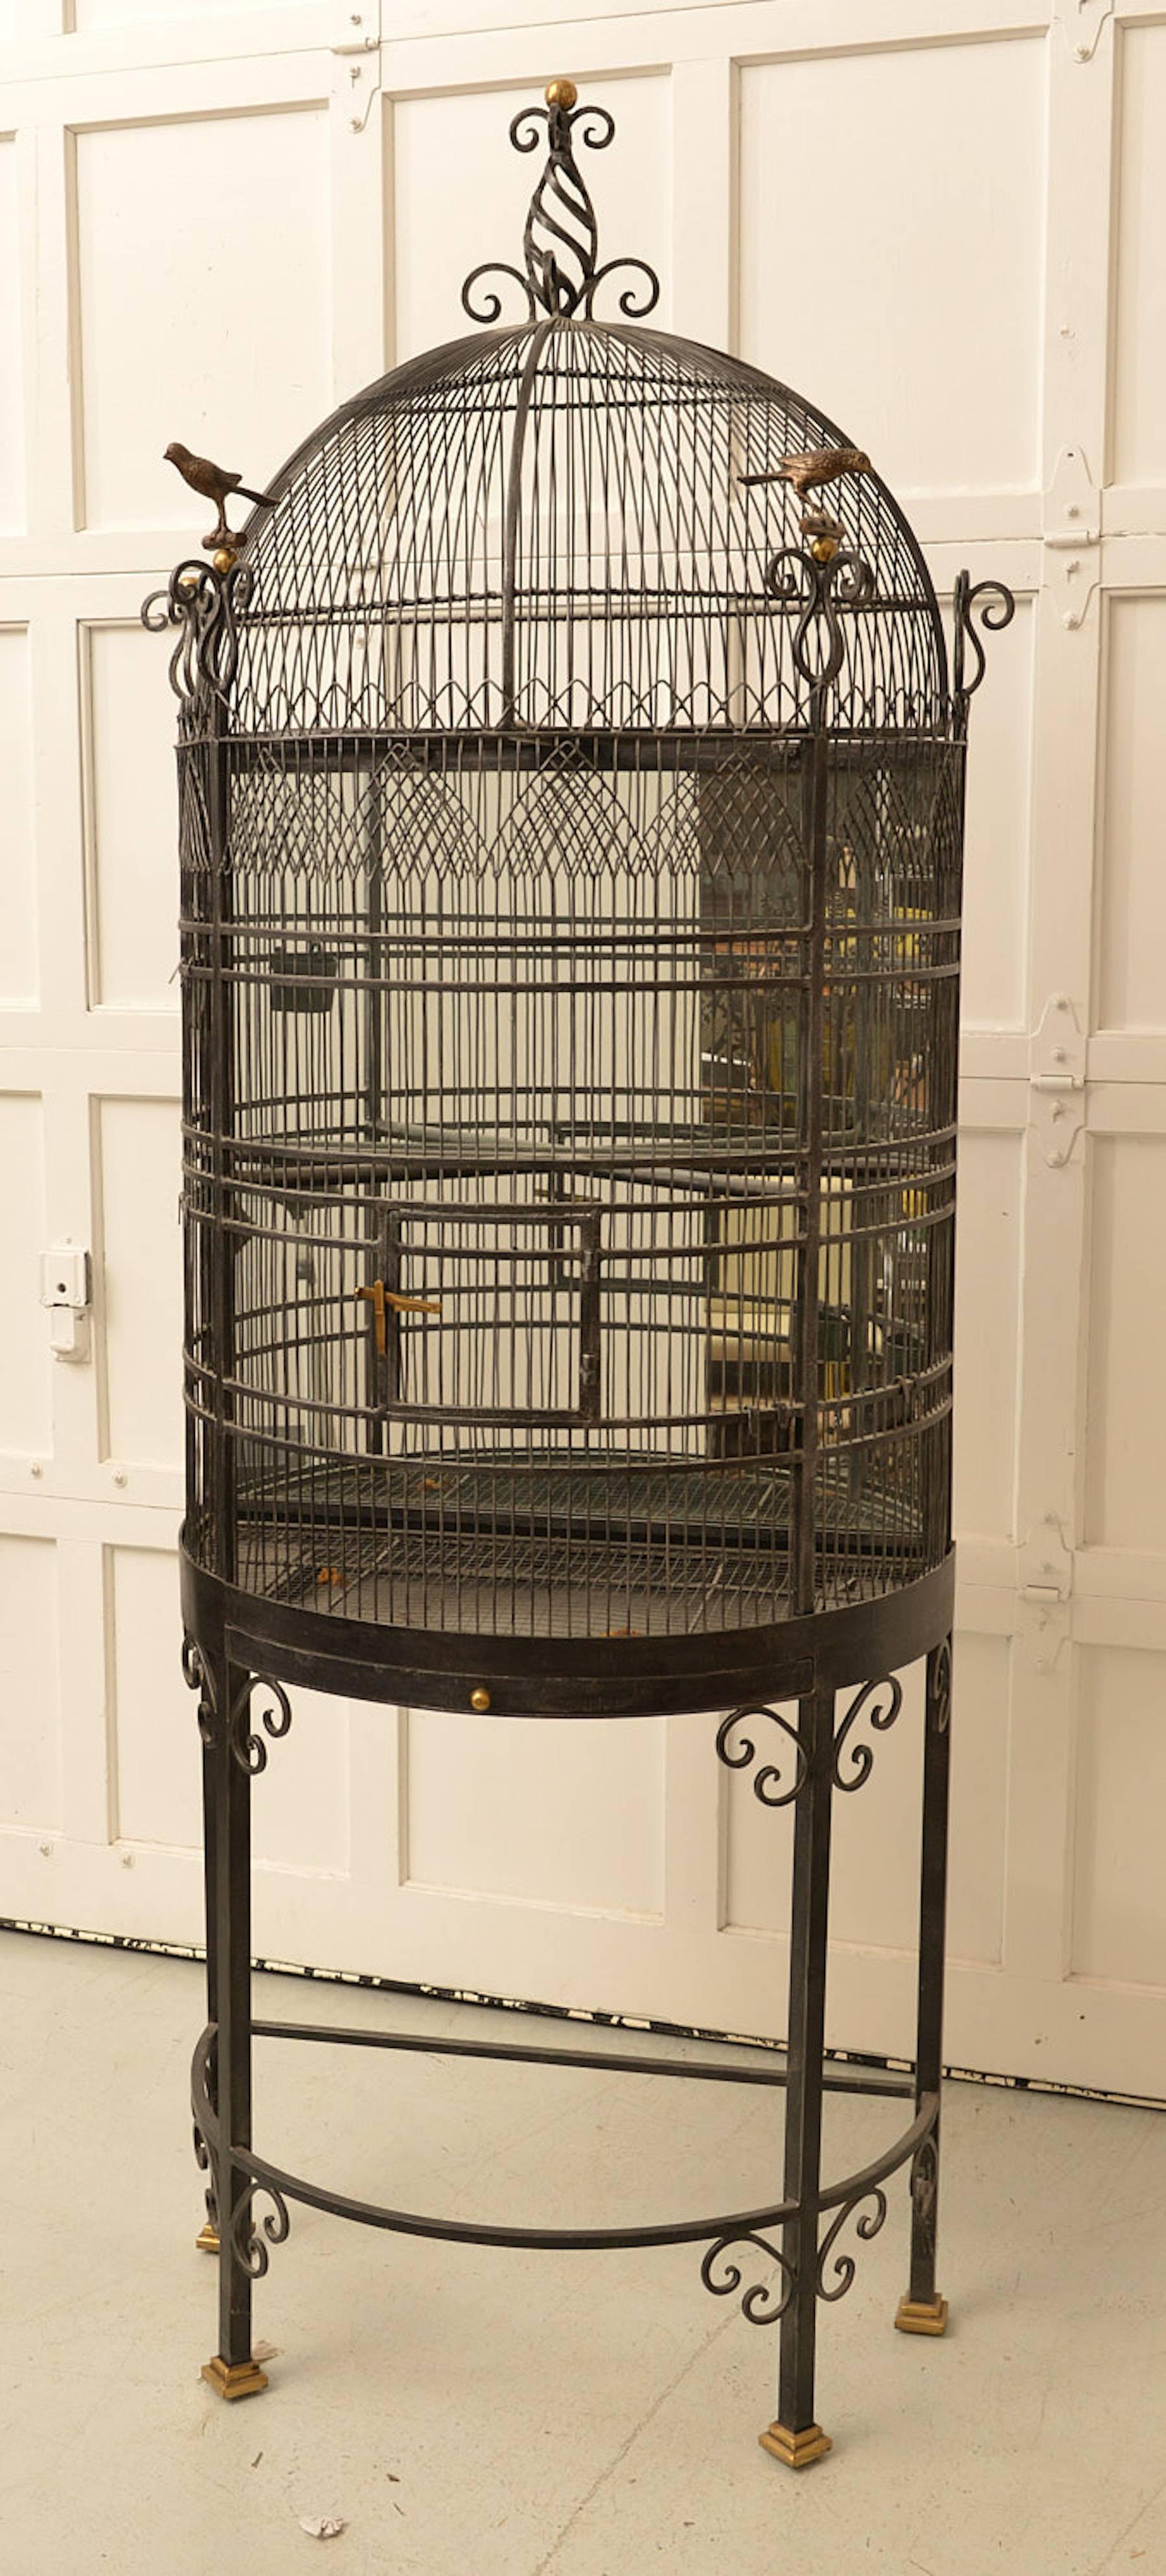 An elaborate brass and iron figural bird cage, of demilune form flanked by a pair of brass perched birds with a mirrored back. A fully functional and highly ornamented bird cage.